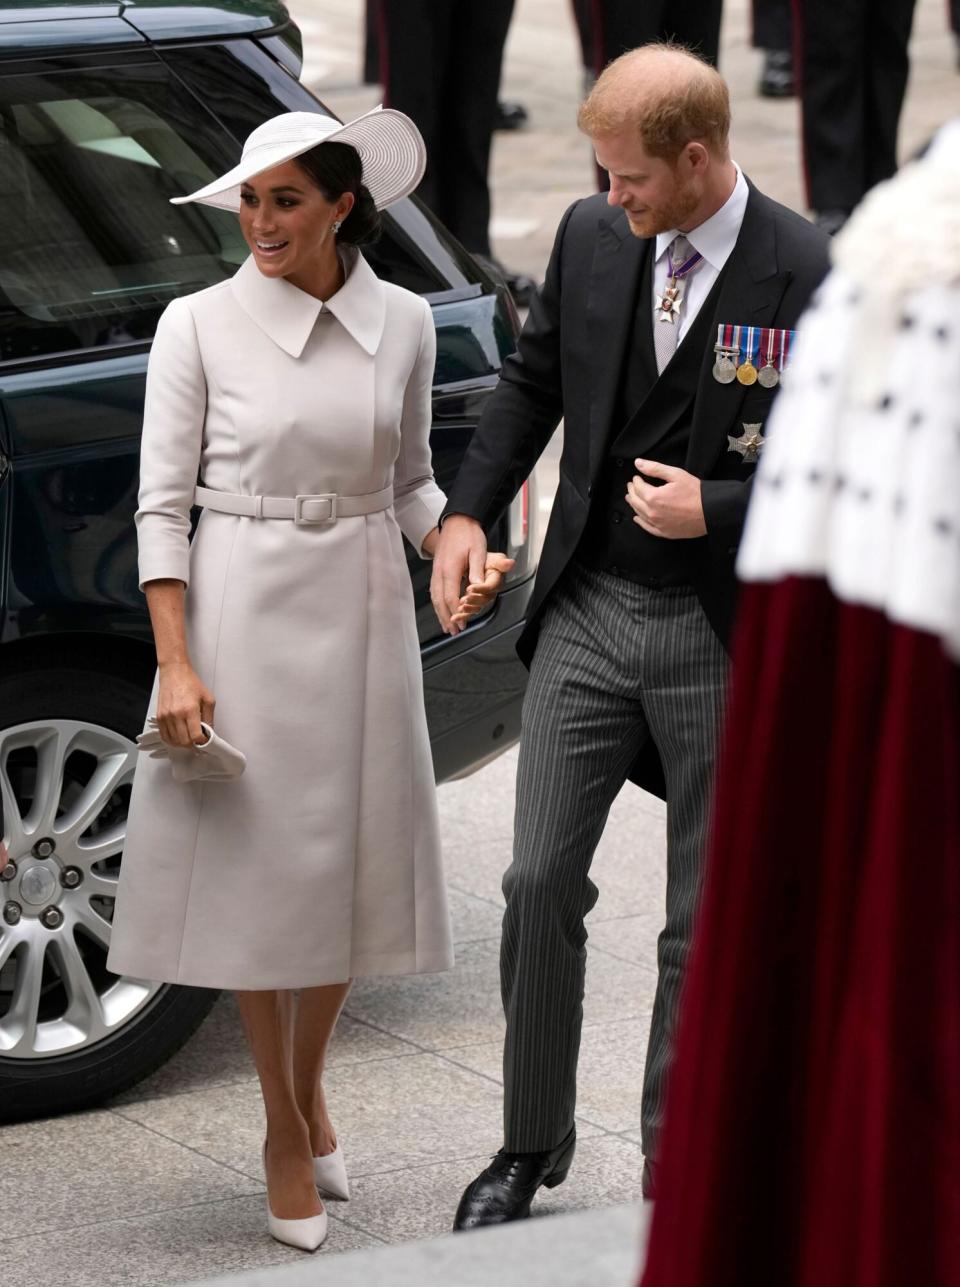 Prince Harry and Meghan Markle, Duke and Duchess of Sussex arrive for a service of thanksgiving